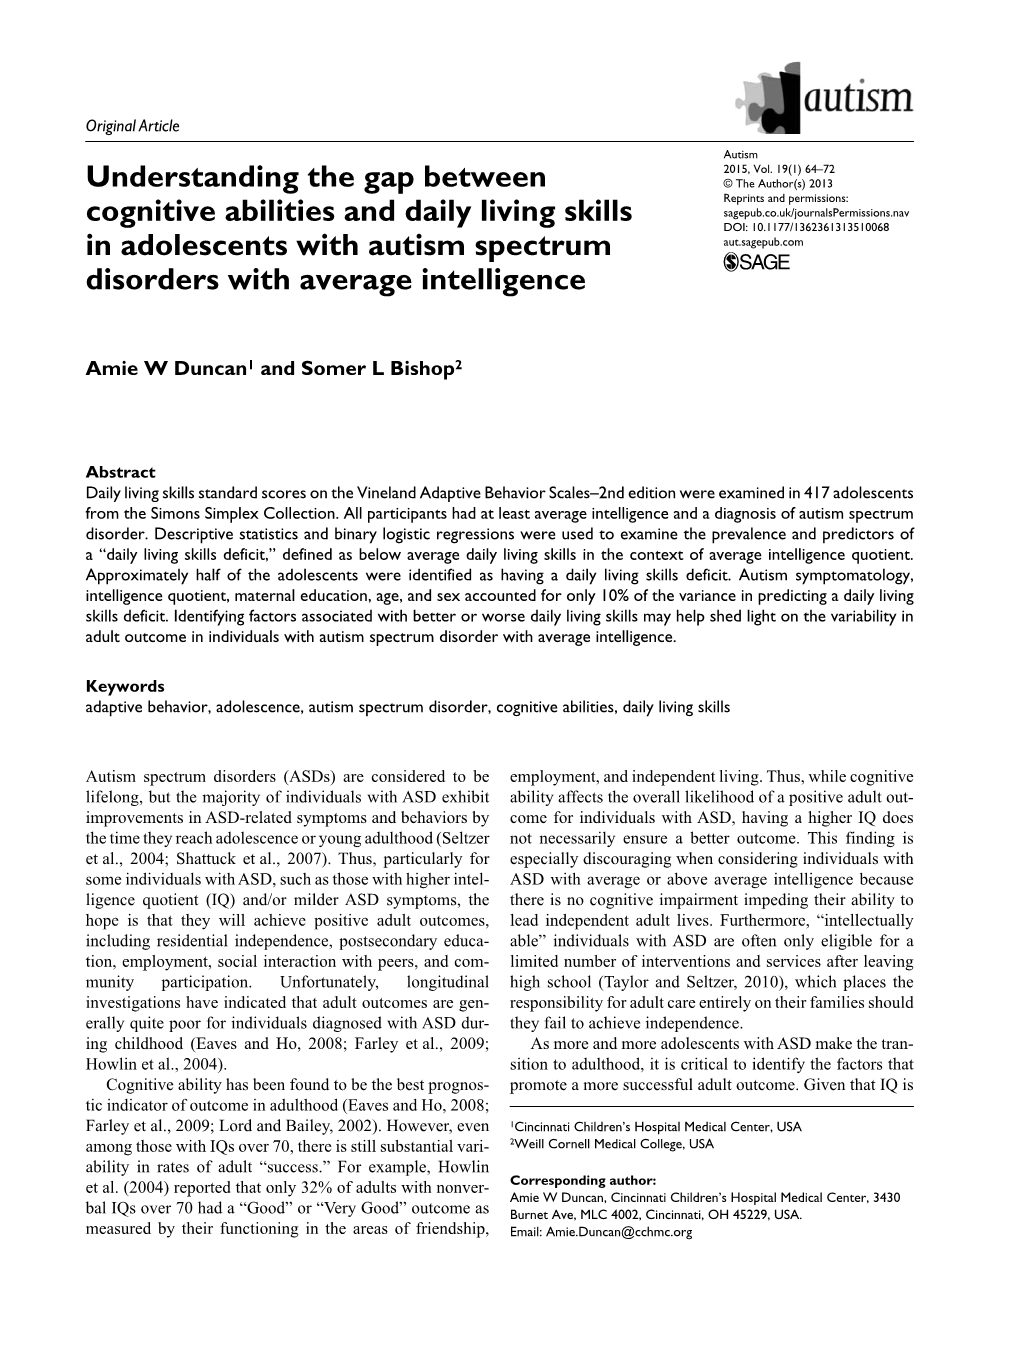 Understanding the Gap Between Cognitive Abilities and Daily Living Skills in Adolescents with Autism Spectrum Disorders with A